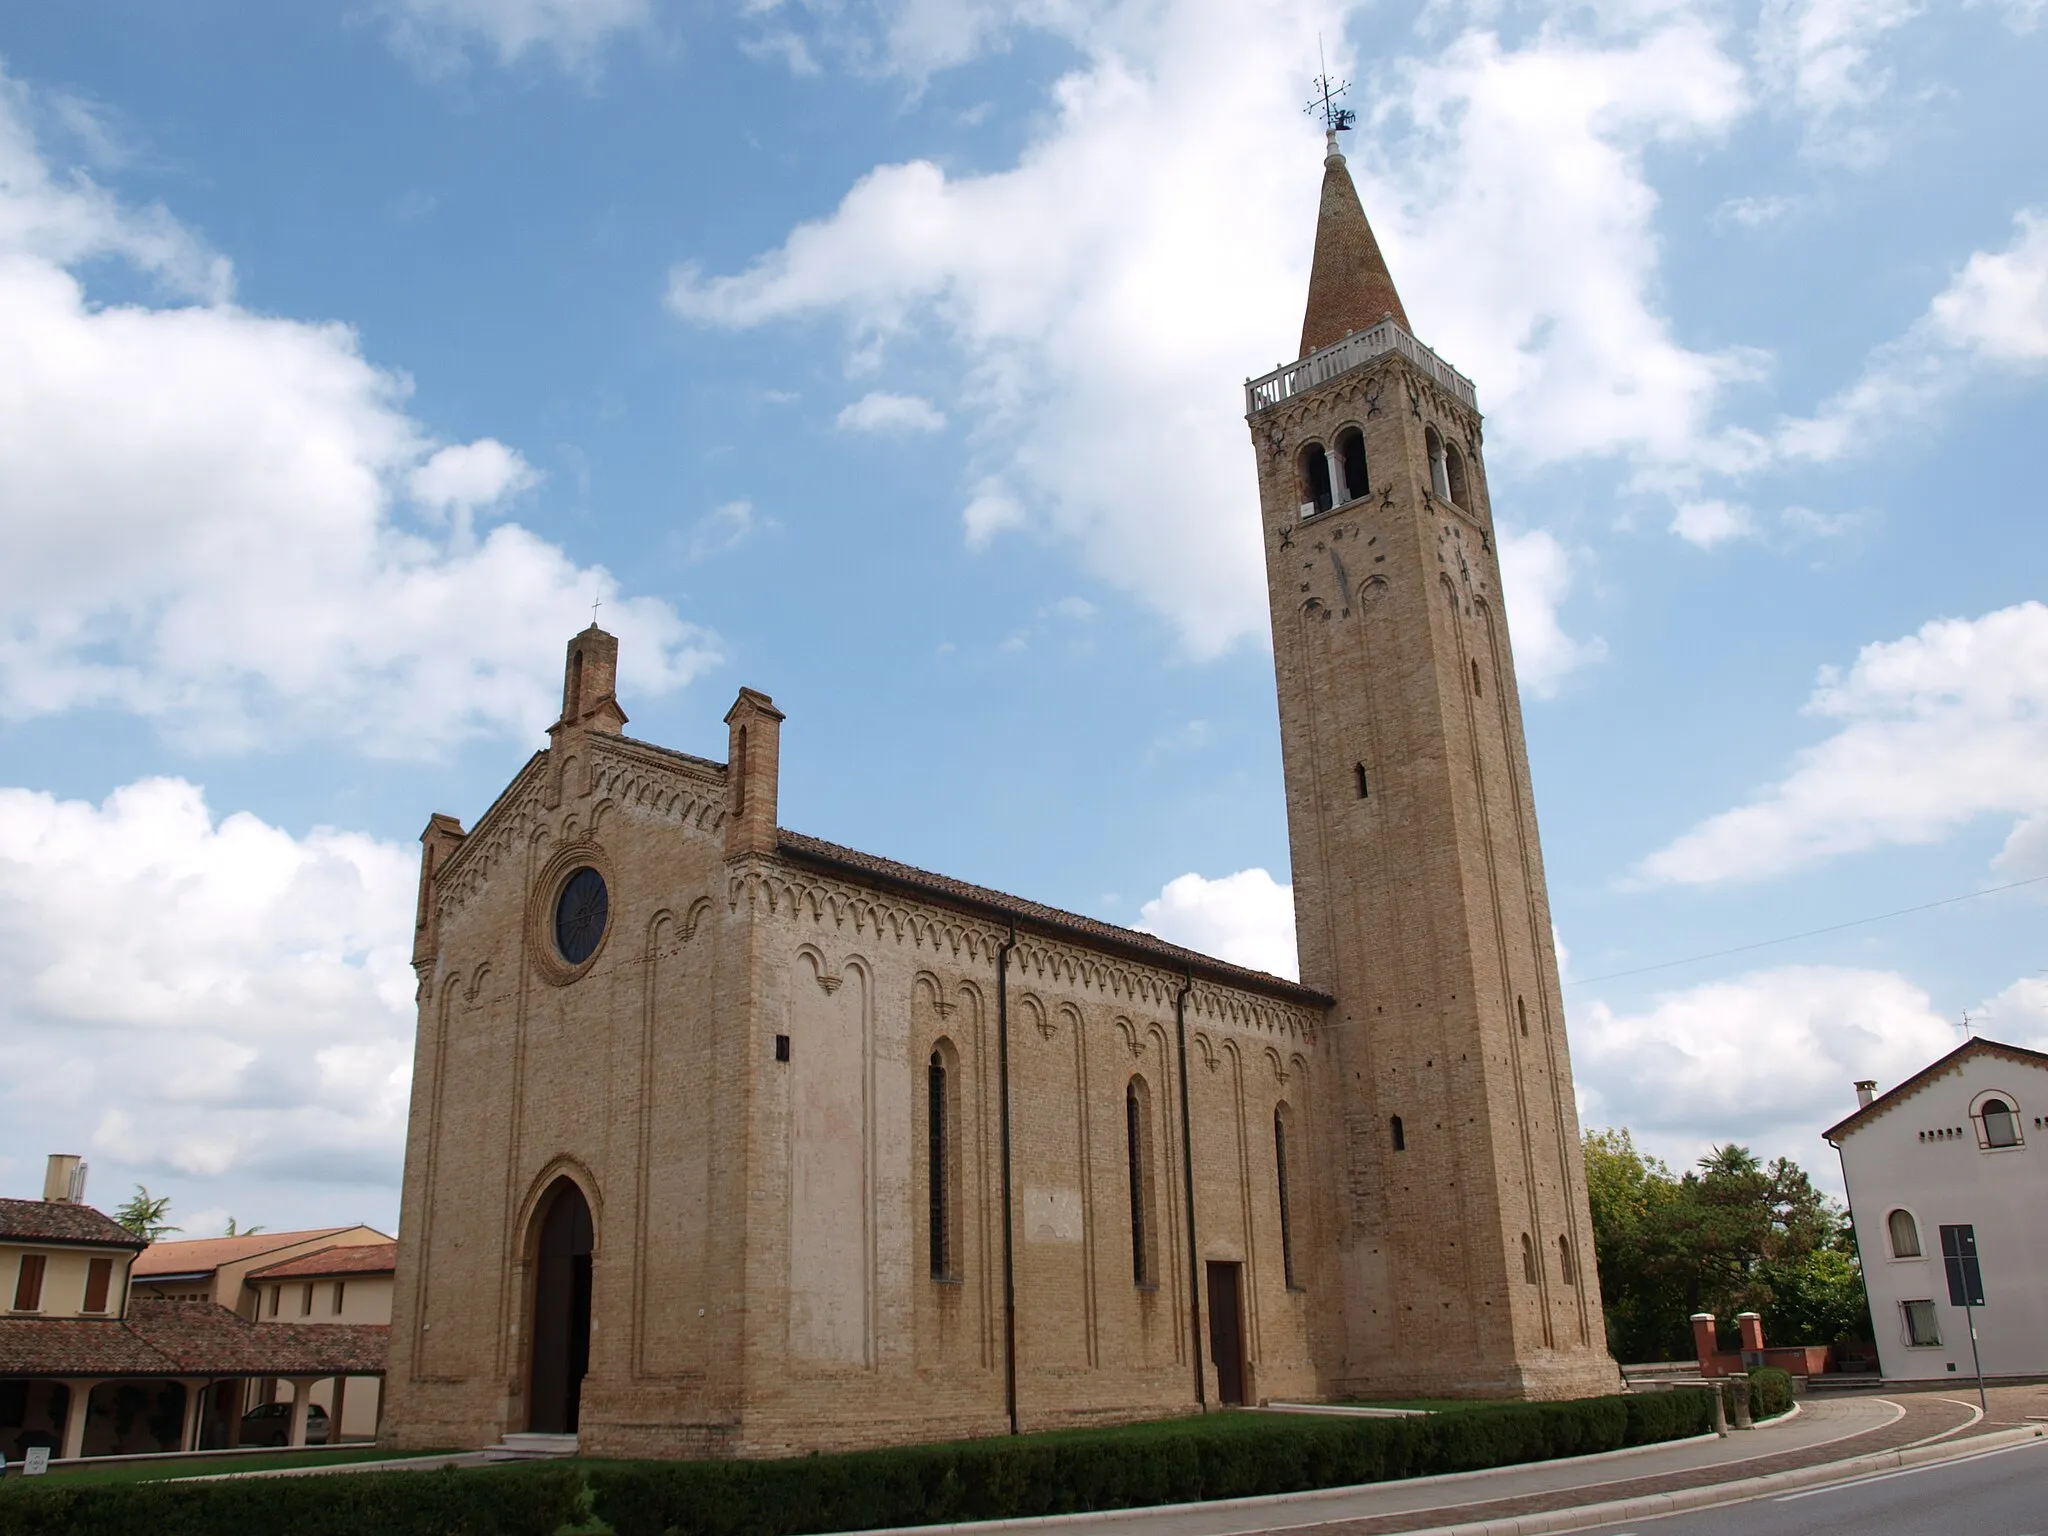 Photo showing: The chiesa di Sant'Antonio Abate (church of Saint Anthony the Great) in Pravisdomini, in Northeast Italy.